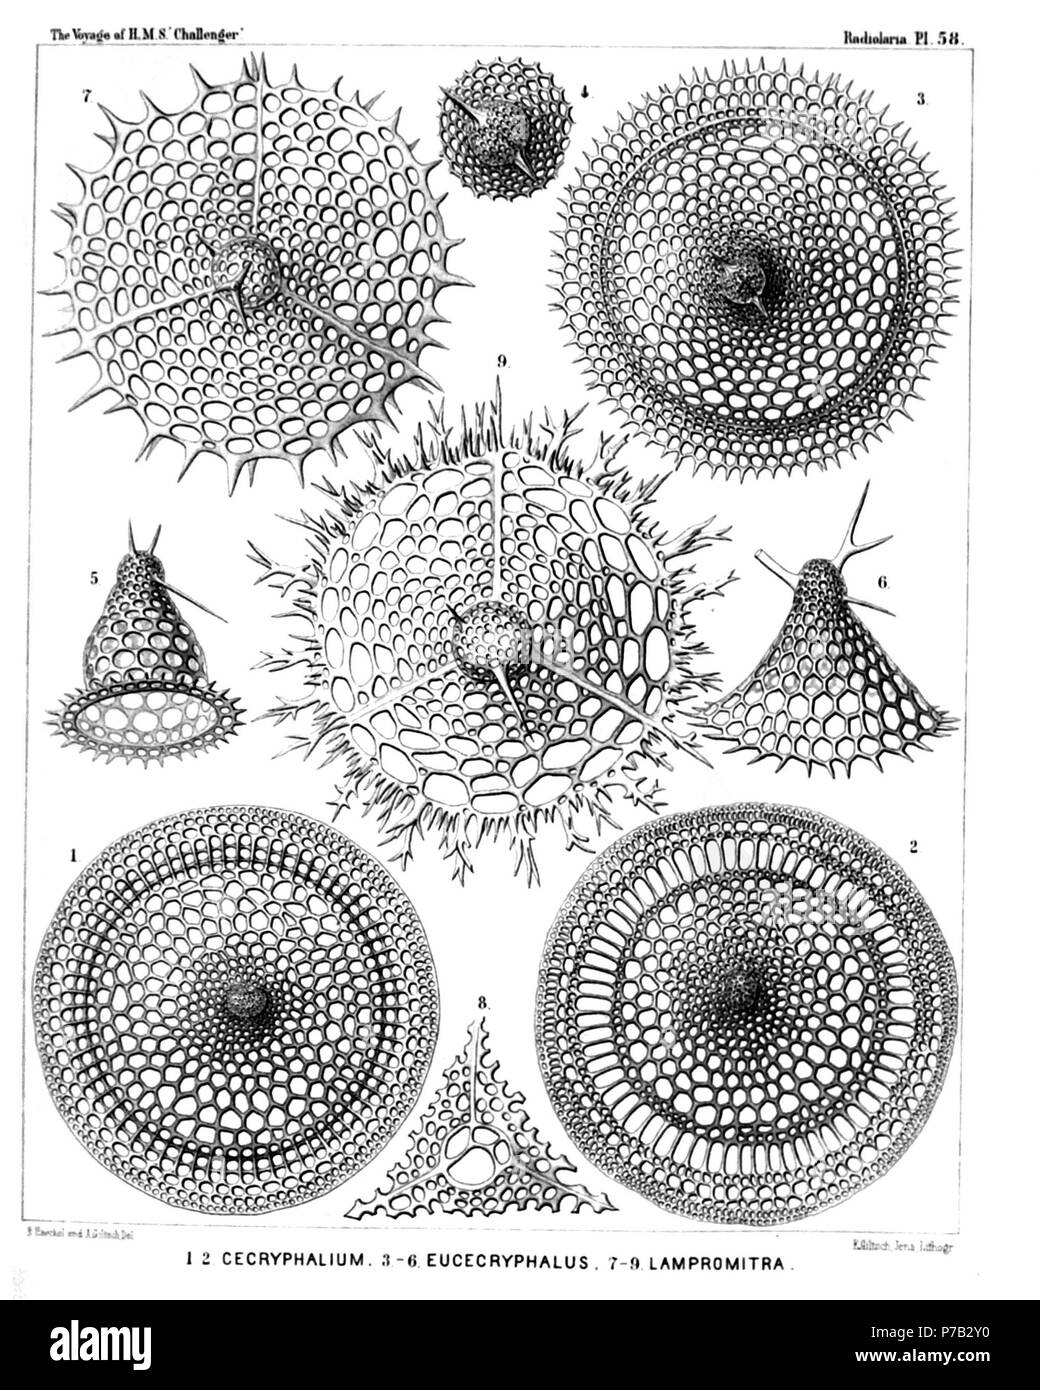 English: Illustration from Report on the Radiolaria collected by H.M.S. Challenger during the years 1873-1876. Part III. Original description follows:  Plate 58. Tripocyrtida, Sethocyrtida, Phormocyrtida et Theocyrtida.  Diam.  Fig. 1. Cecryphalium sestrodiscus, n. sp., × 400  Apical view.  Fig. 2. Cecryphalium lamprodiscus, n. sp., × 400  Apical view.  Fig. 3. Clathrocyclas coscinodiscus, n. sp., × 400  Apical view.  Fig. 4. Clathrocyclas coscinodiscus, n. sp., × 700  The cephalis alone, with the two horns.  Fig. 5. Clathrocyclas semeles, n. sp., × 400  Lateral view.  Fig. 6. Sethoconus capre Stock Photo